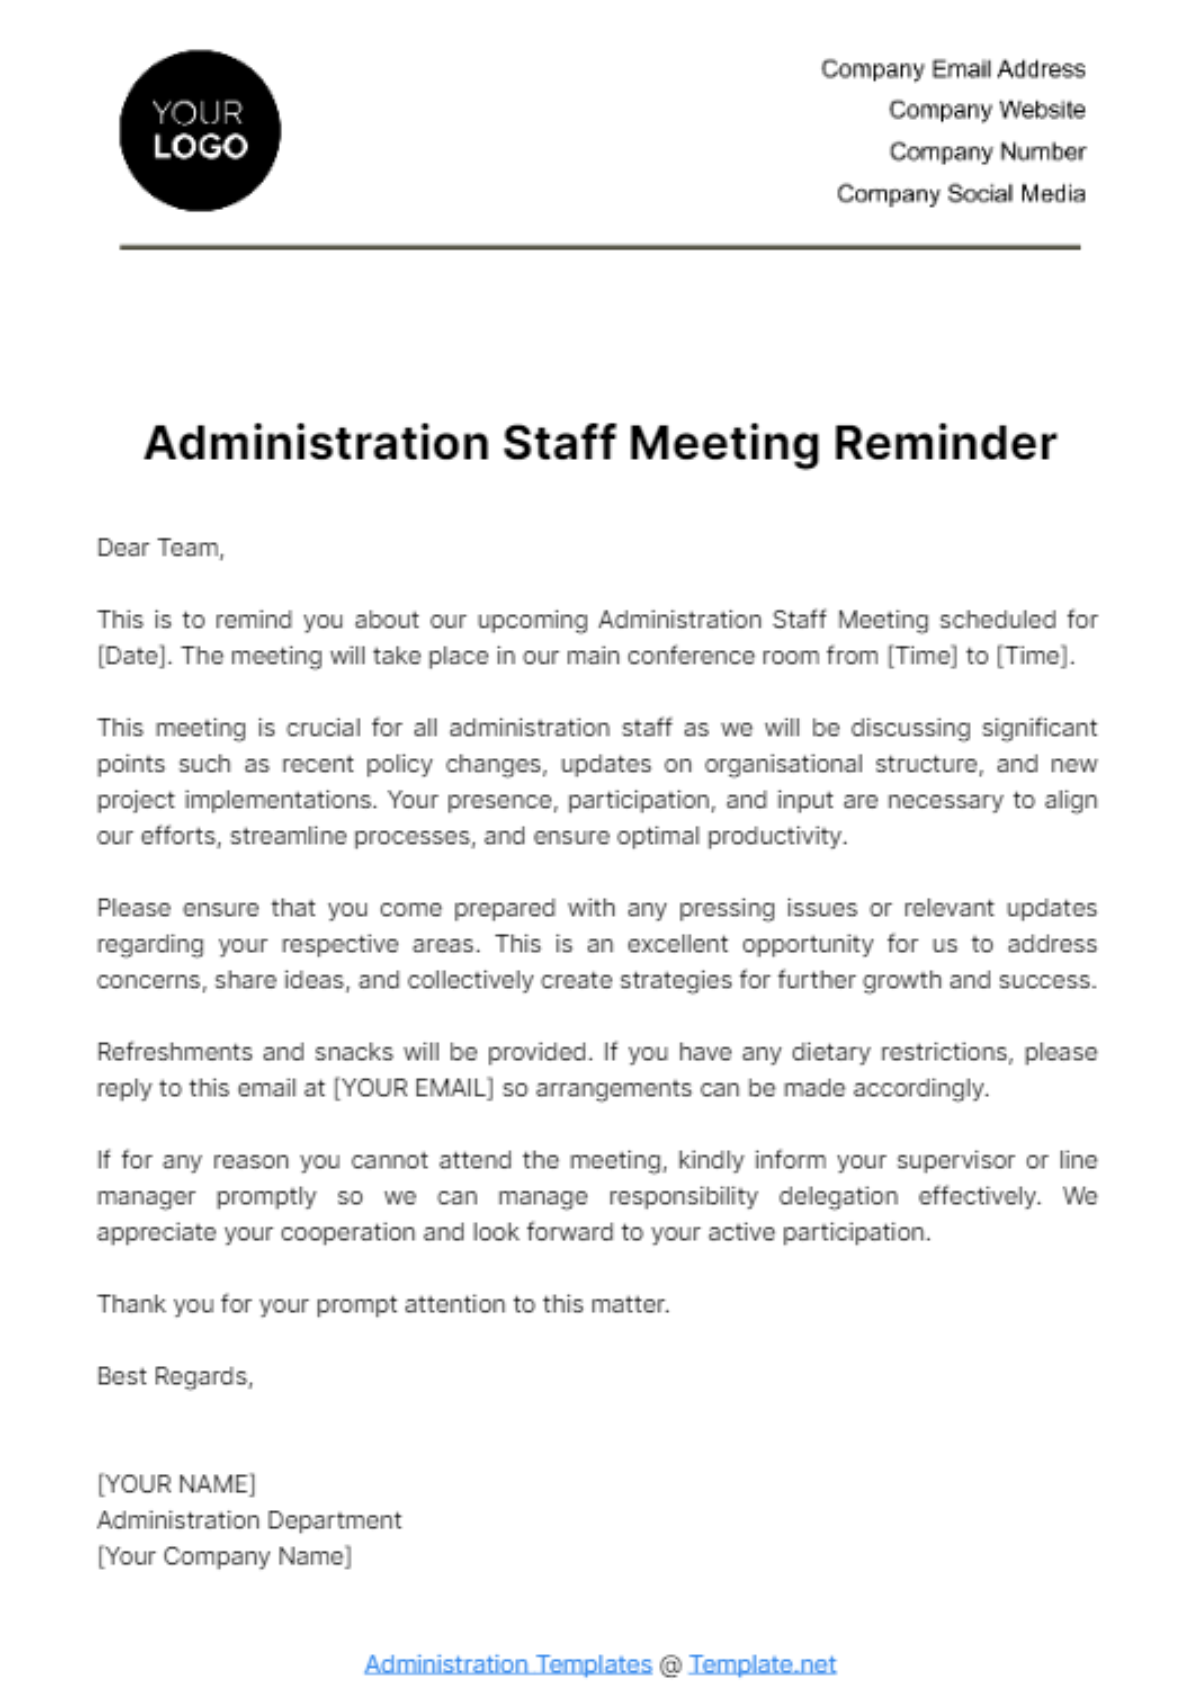 Administration Staff Meeting Reminder Template